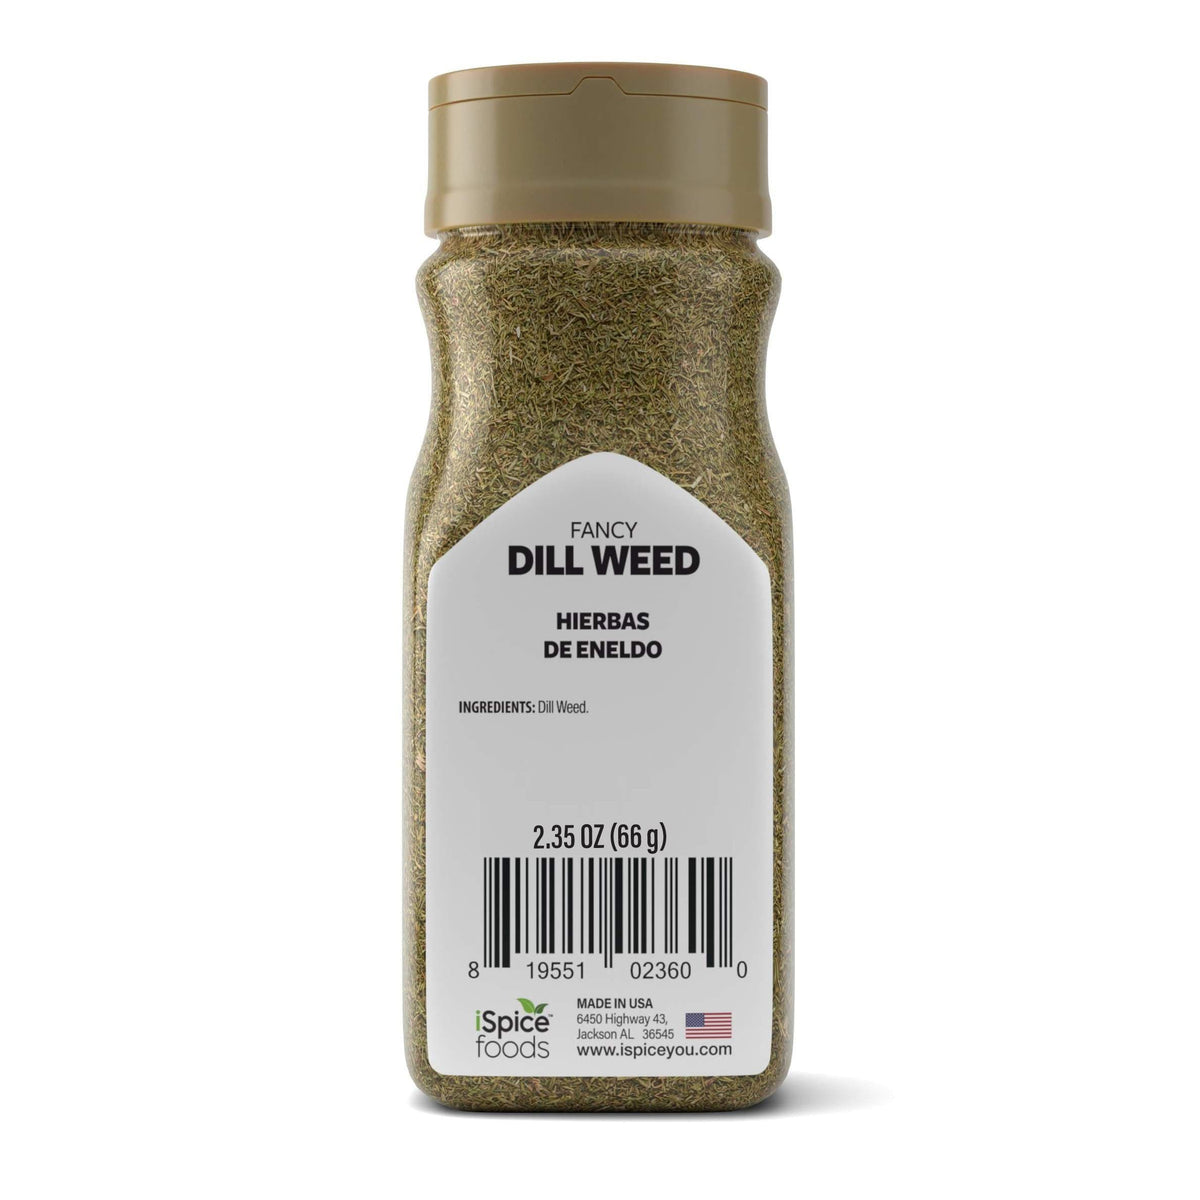 Dill Weed.